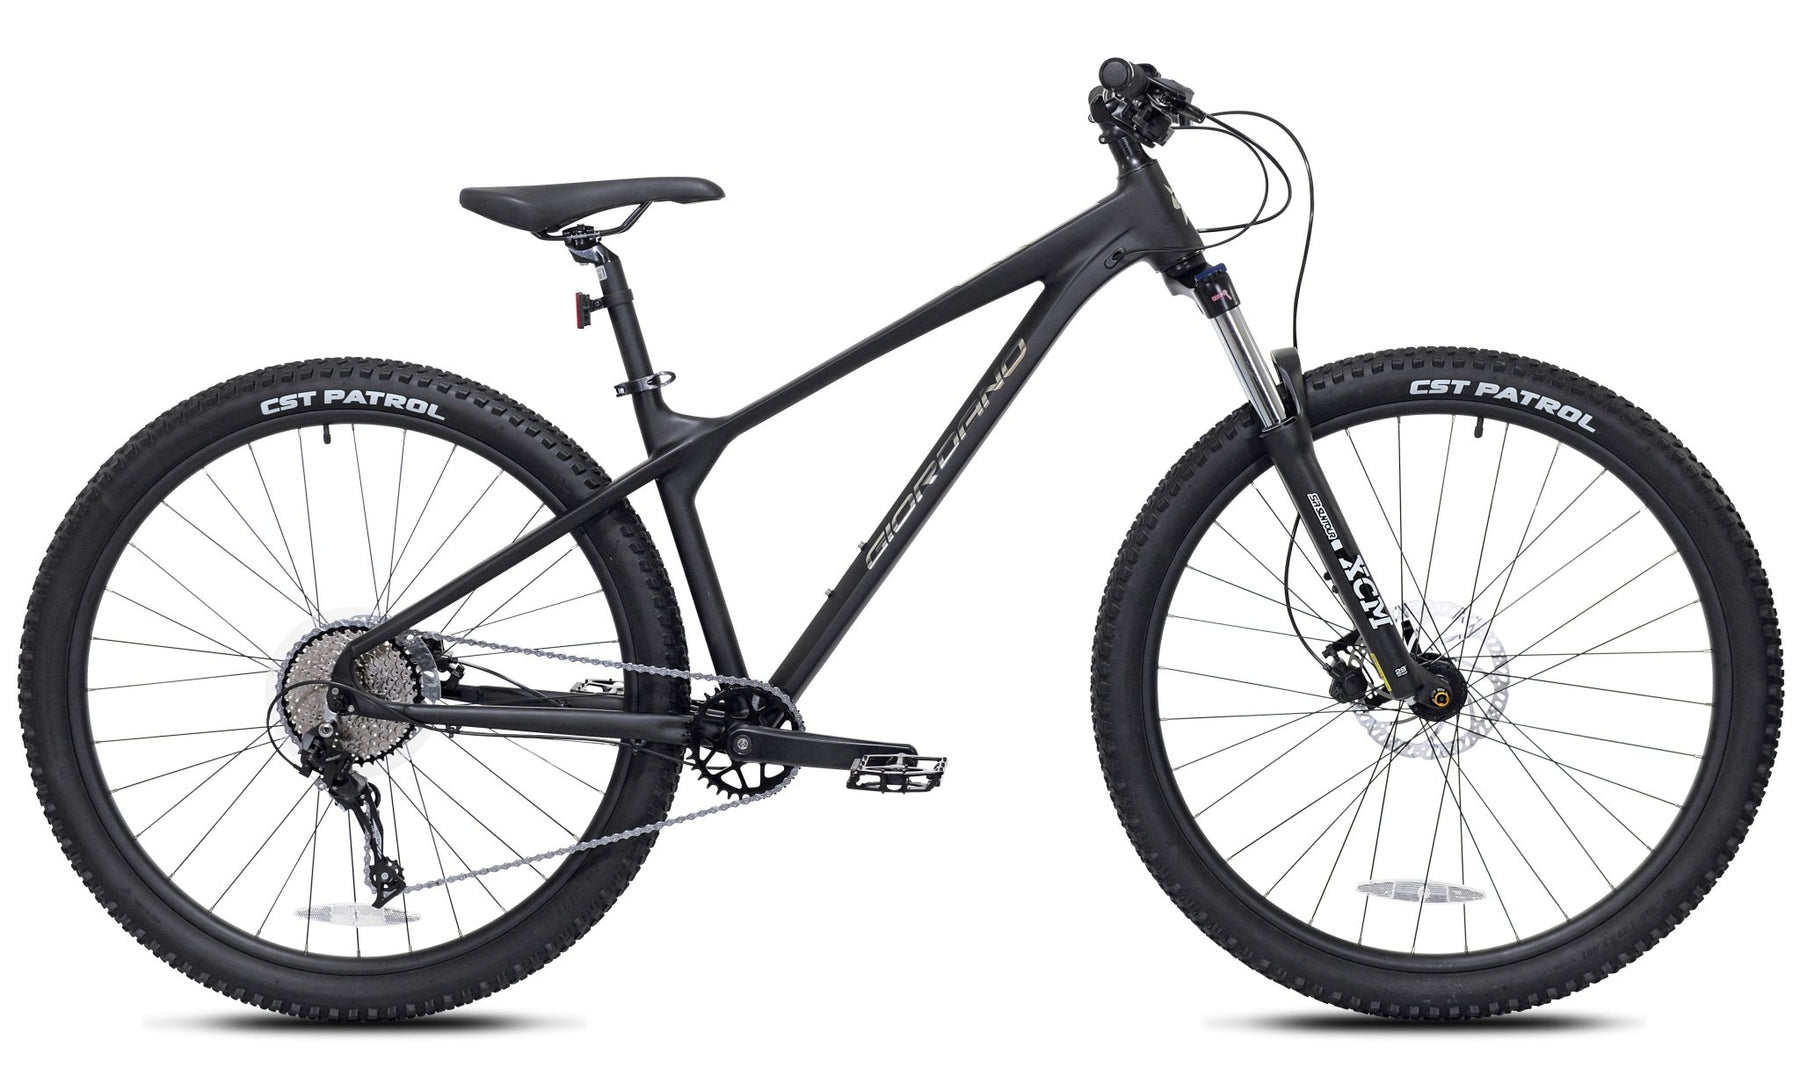 29" Giordano® Intrepid | Mountain Bike for Ages 14+